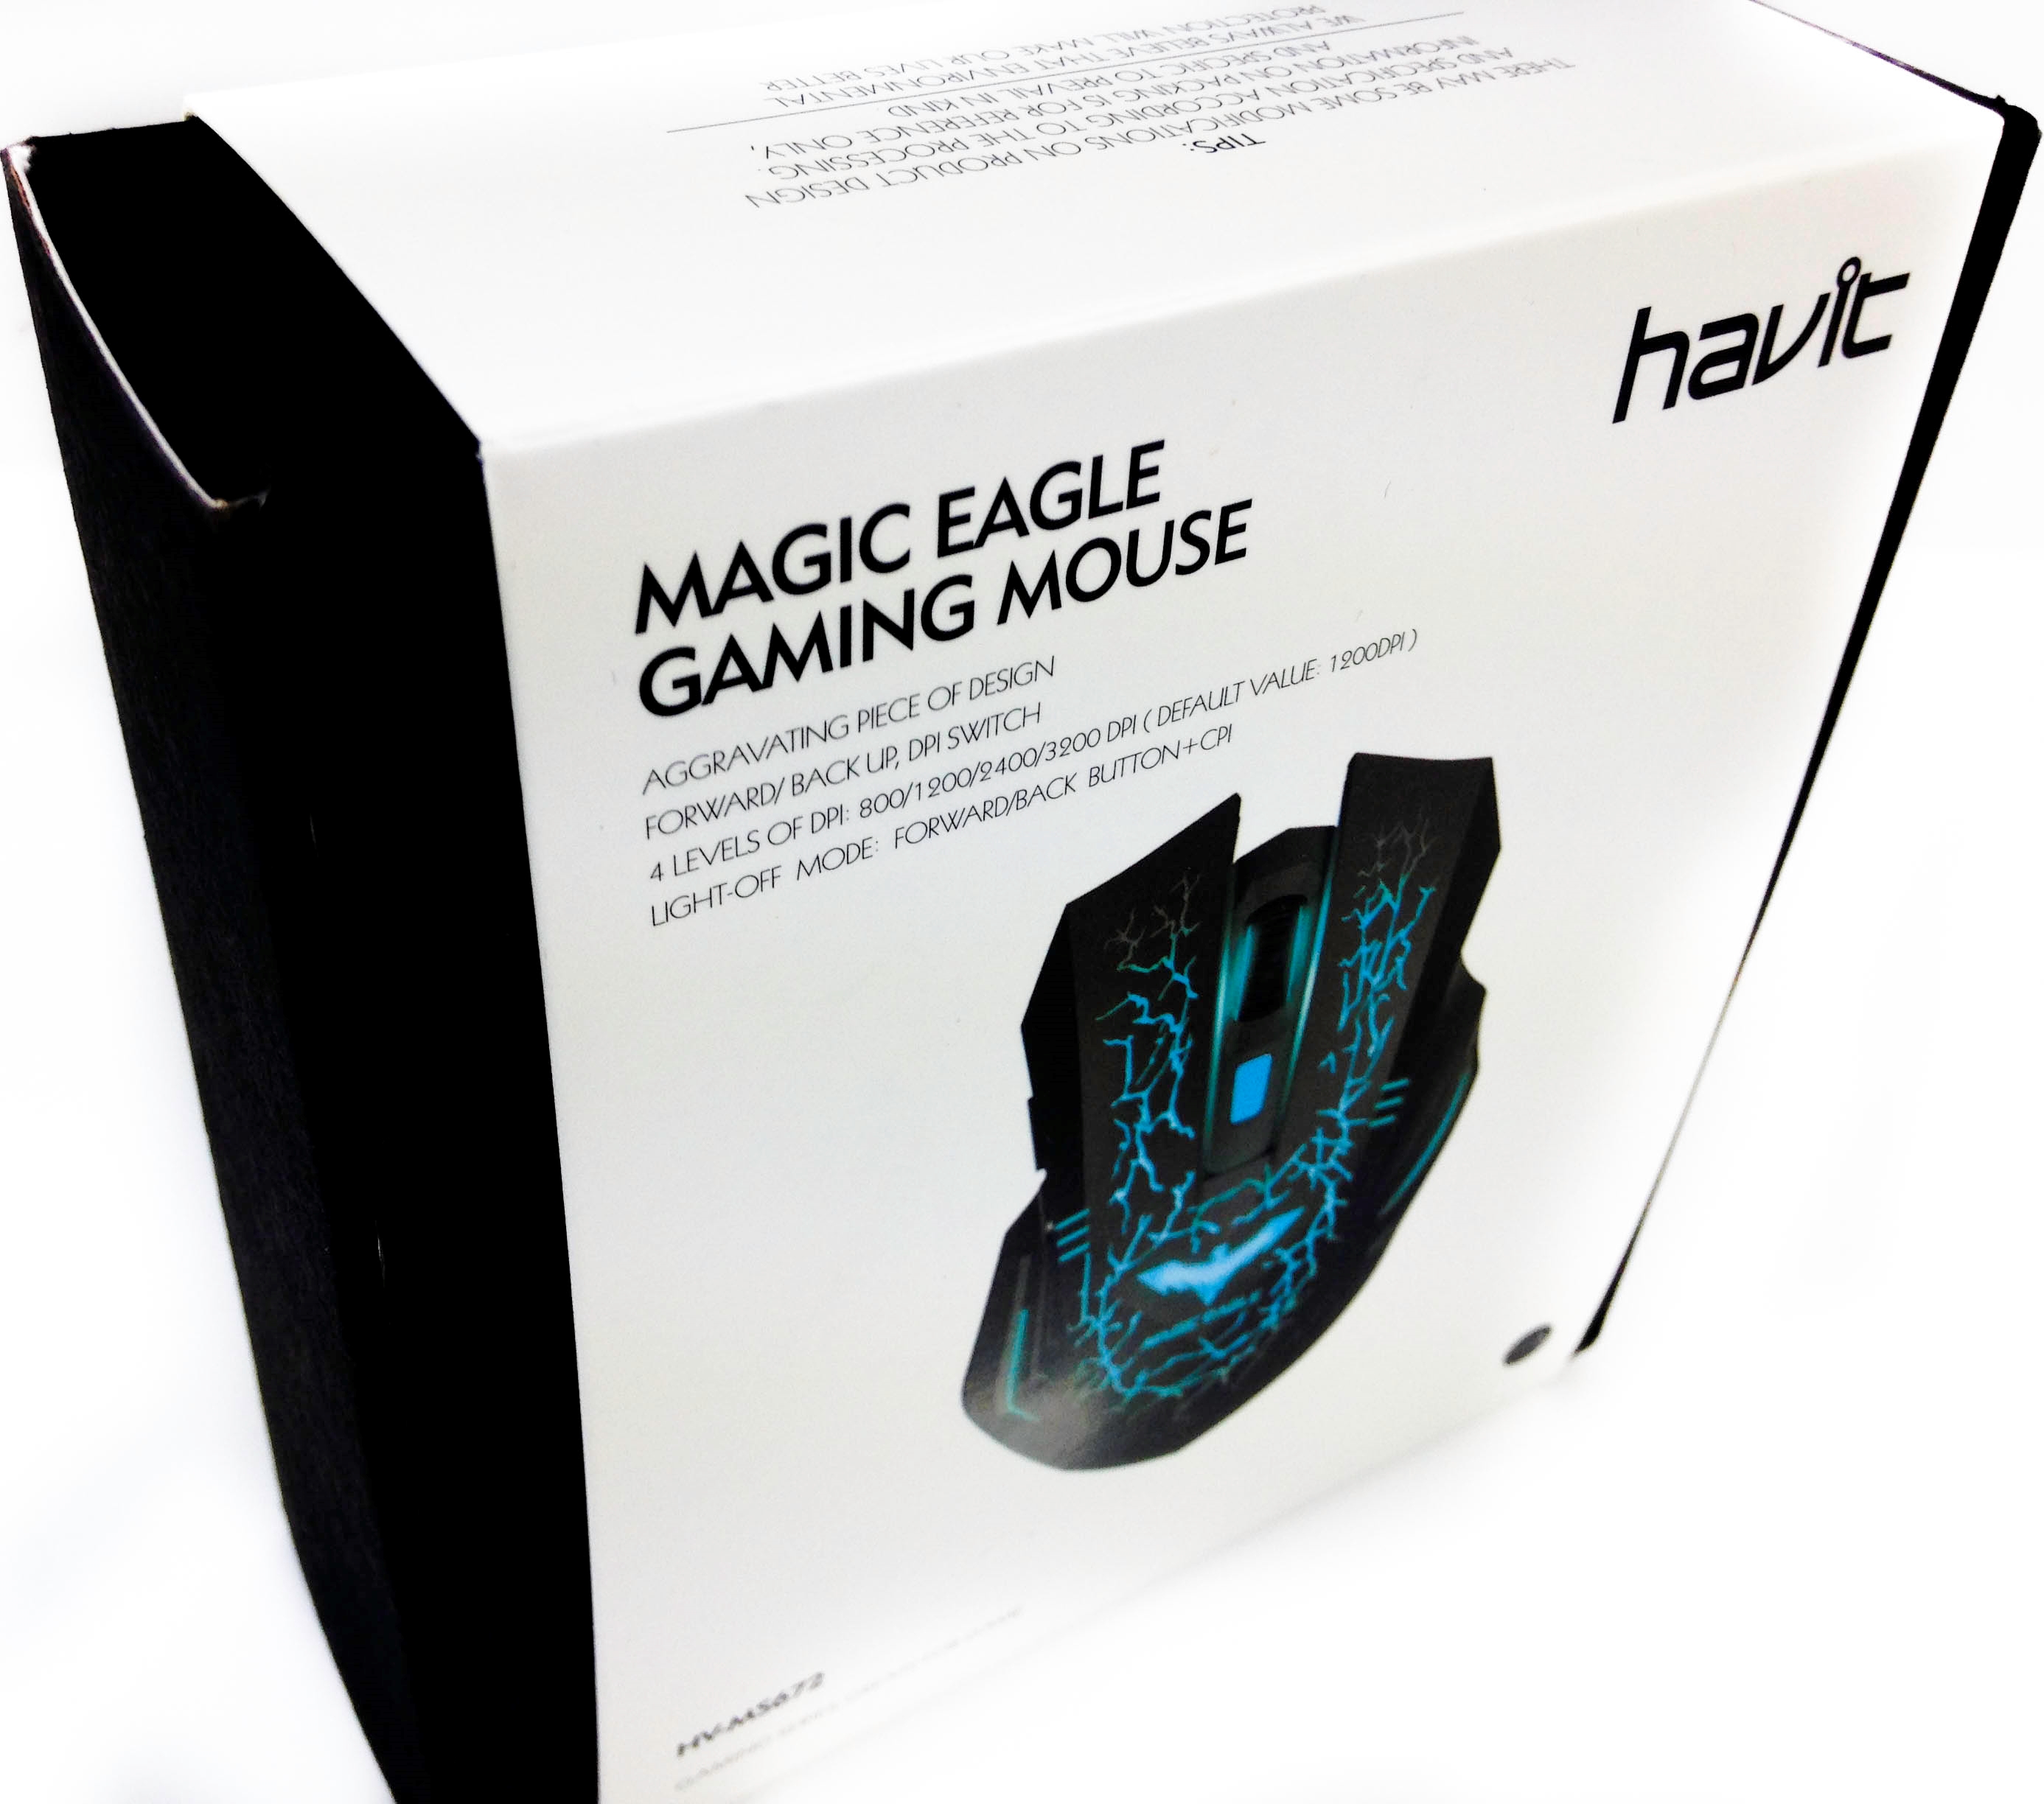 magic eagle gaming mouse instructions